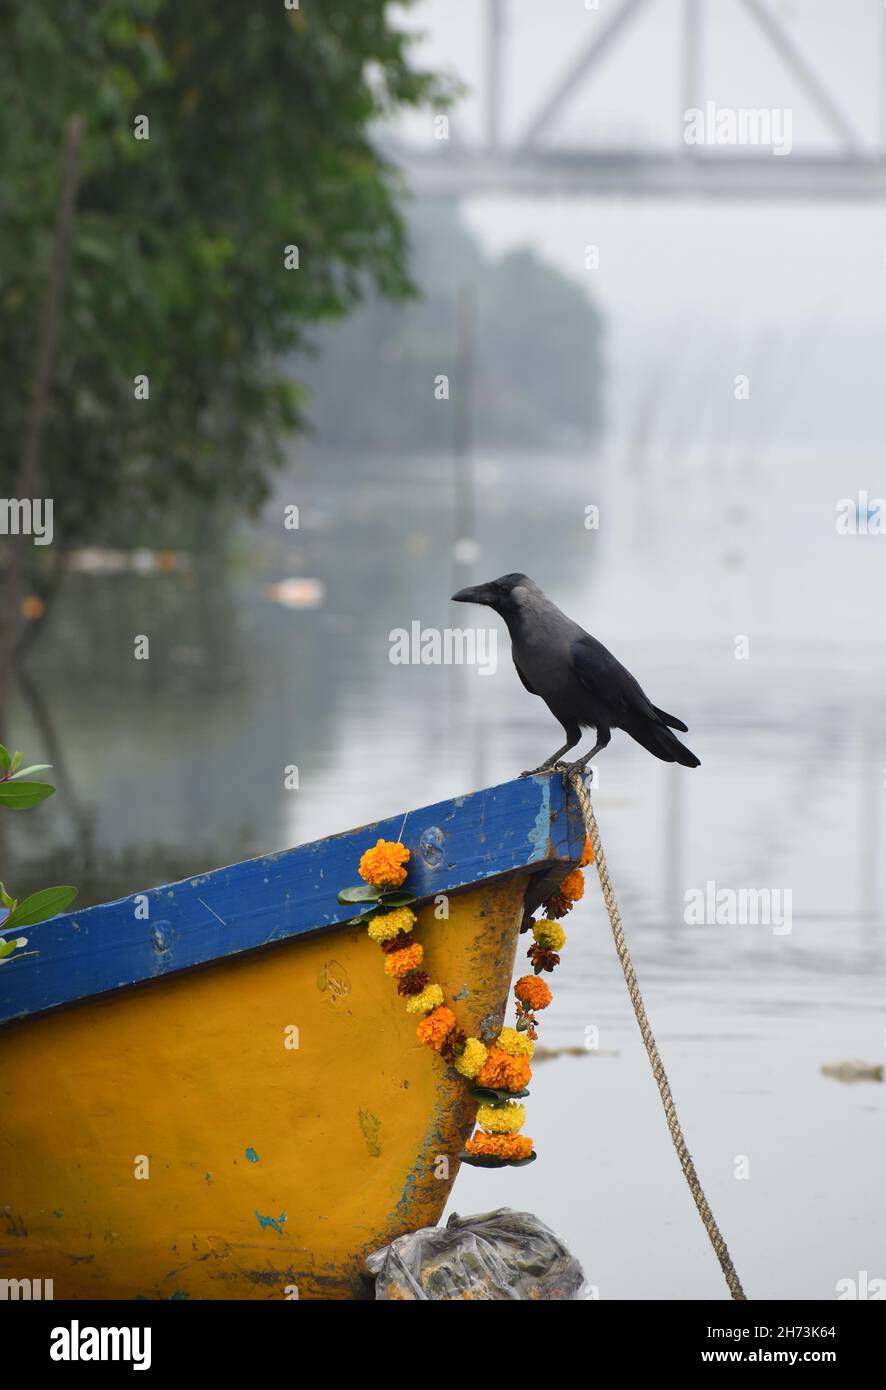 Crow perched on a garlanded boat in Ulhas creek near combivli Stock Photo